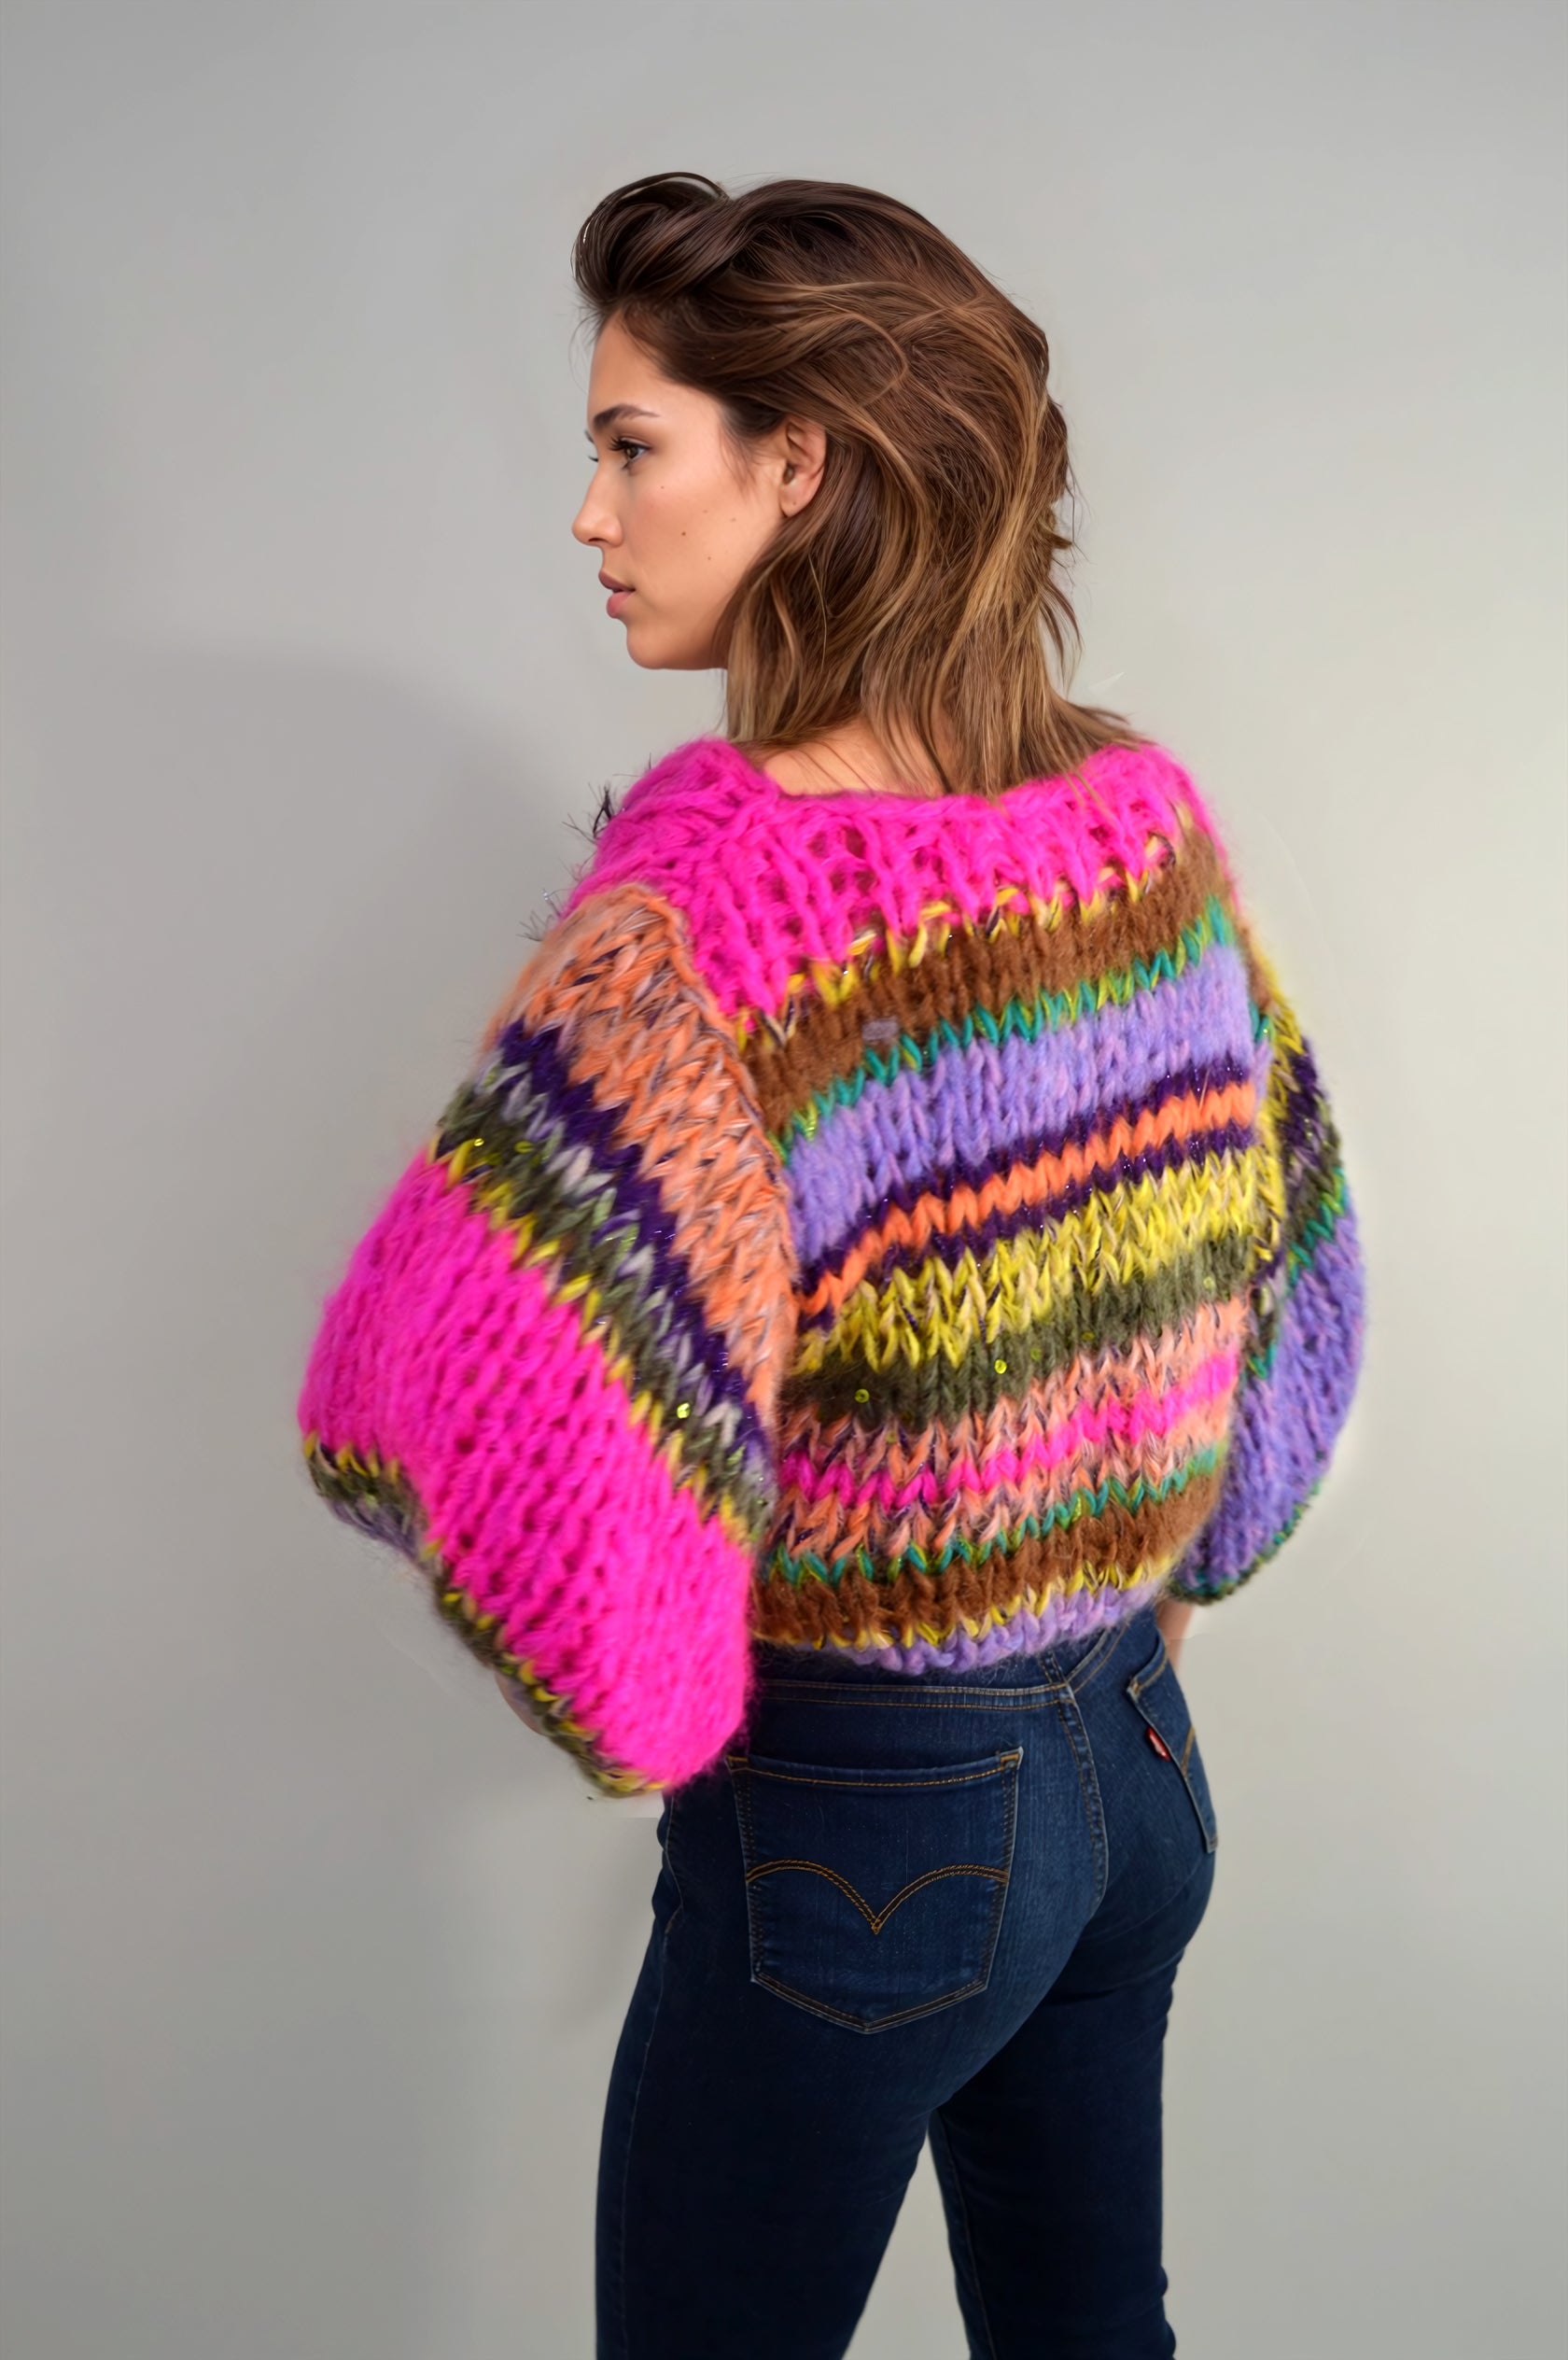 Handknitted sweater,colorful knitwear, handmade sweater, Handmade cardigan, Hnadknitted cardigan, Handcrocheted dress, colorful fashion